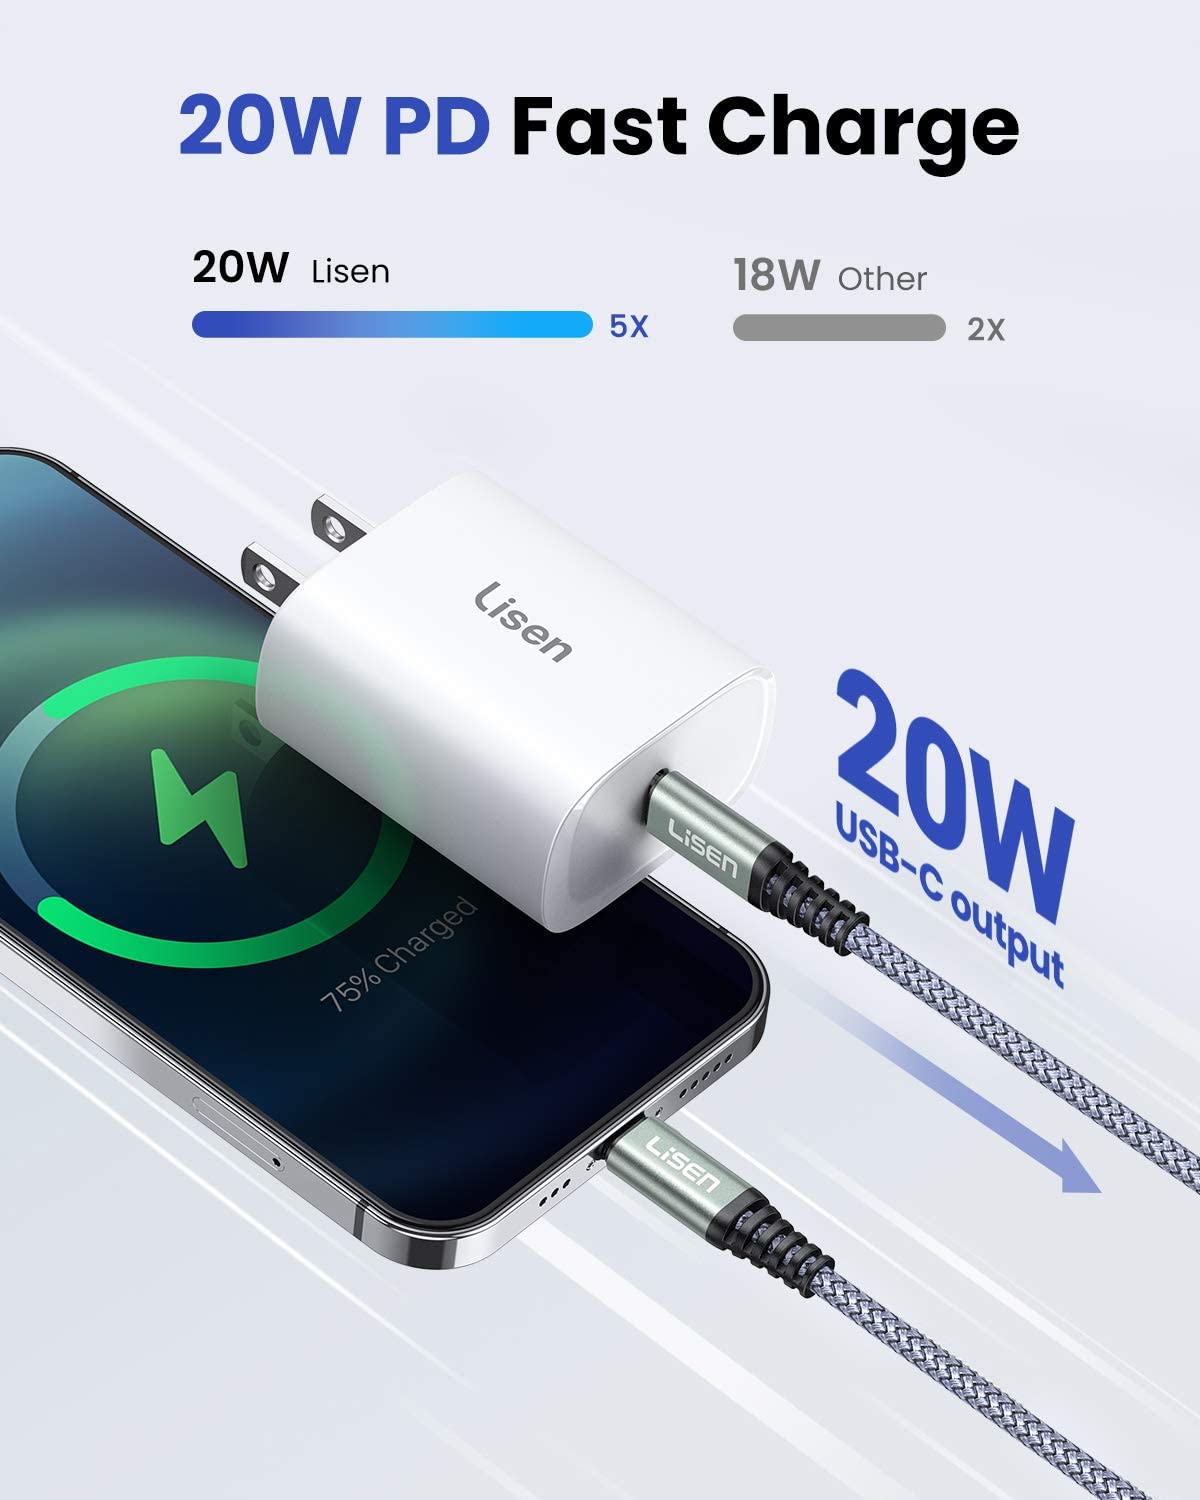 20W iPone USB C Wall Charger——LISEN